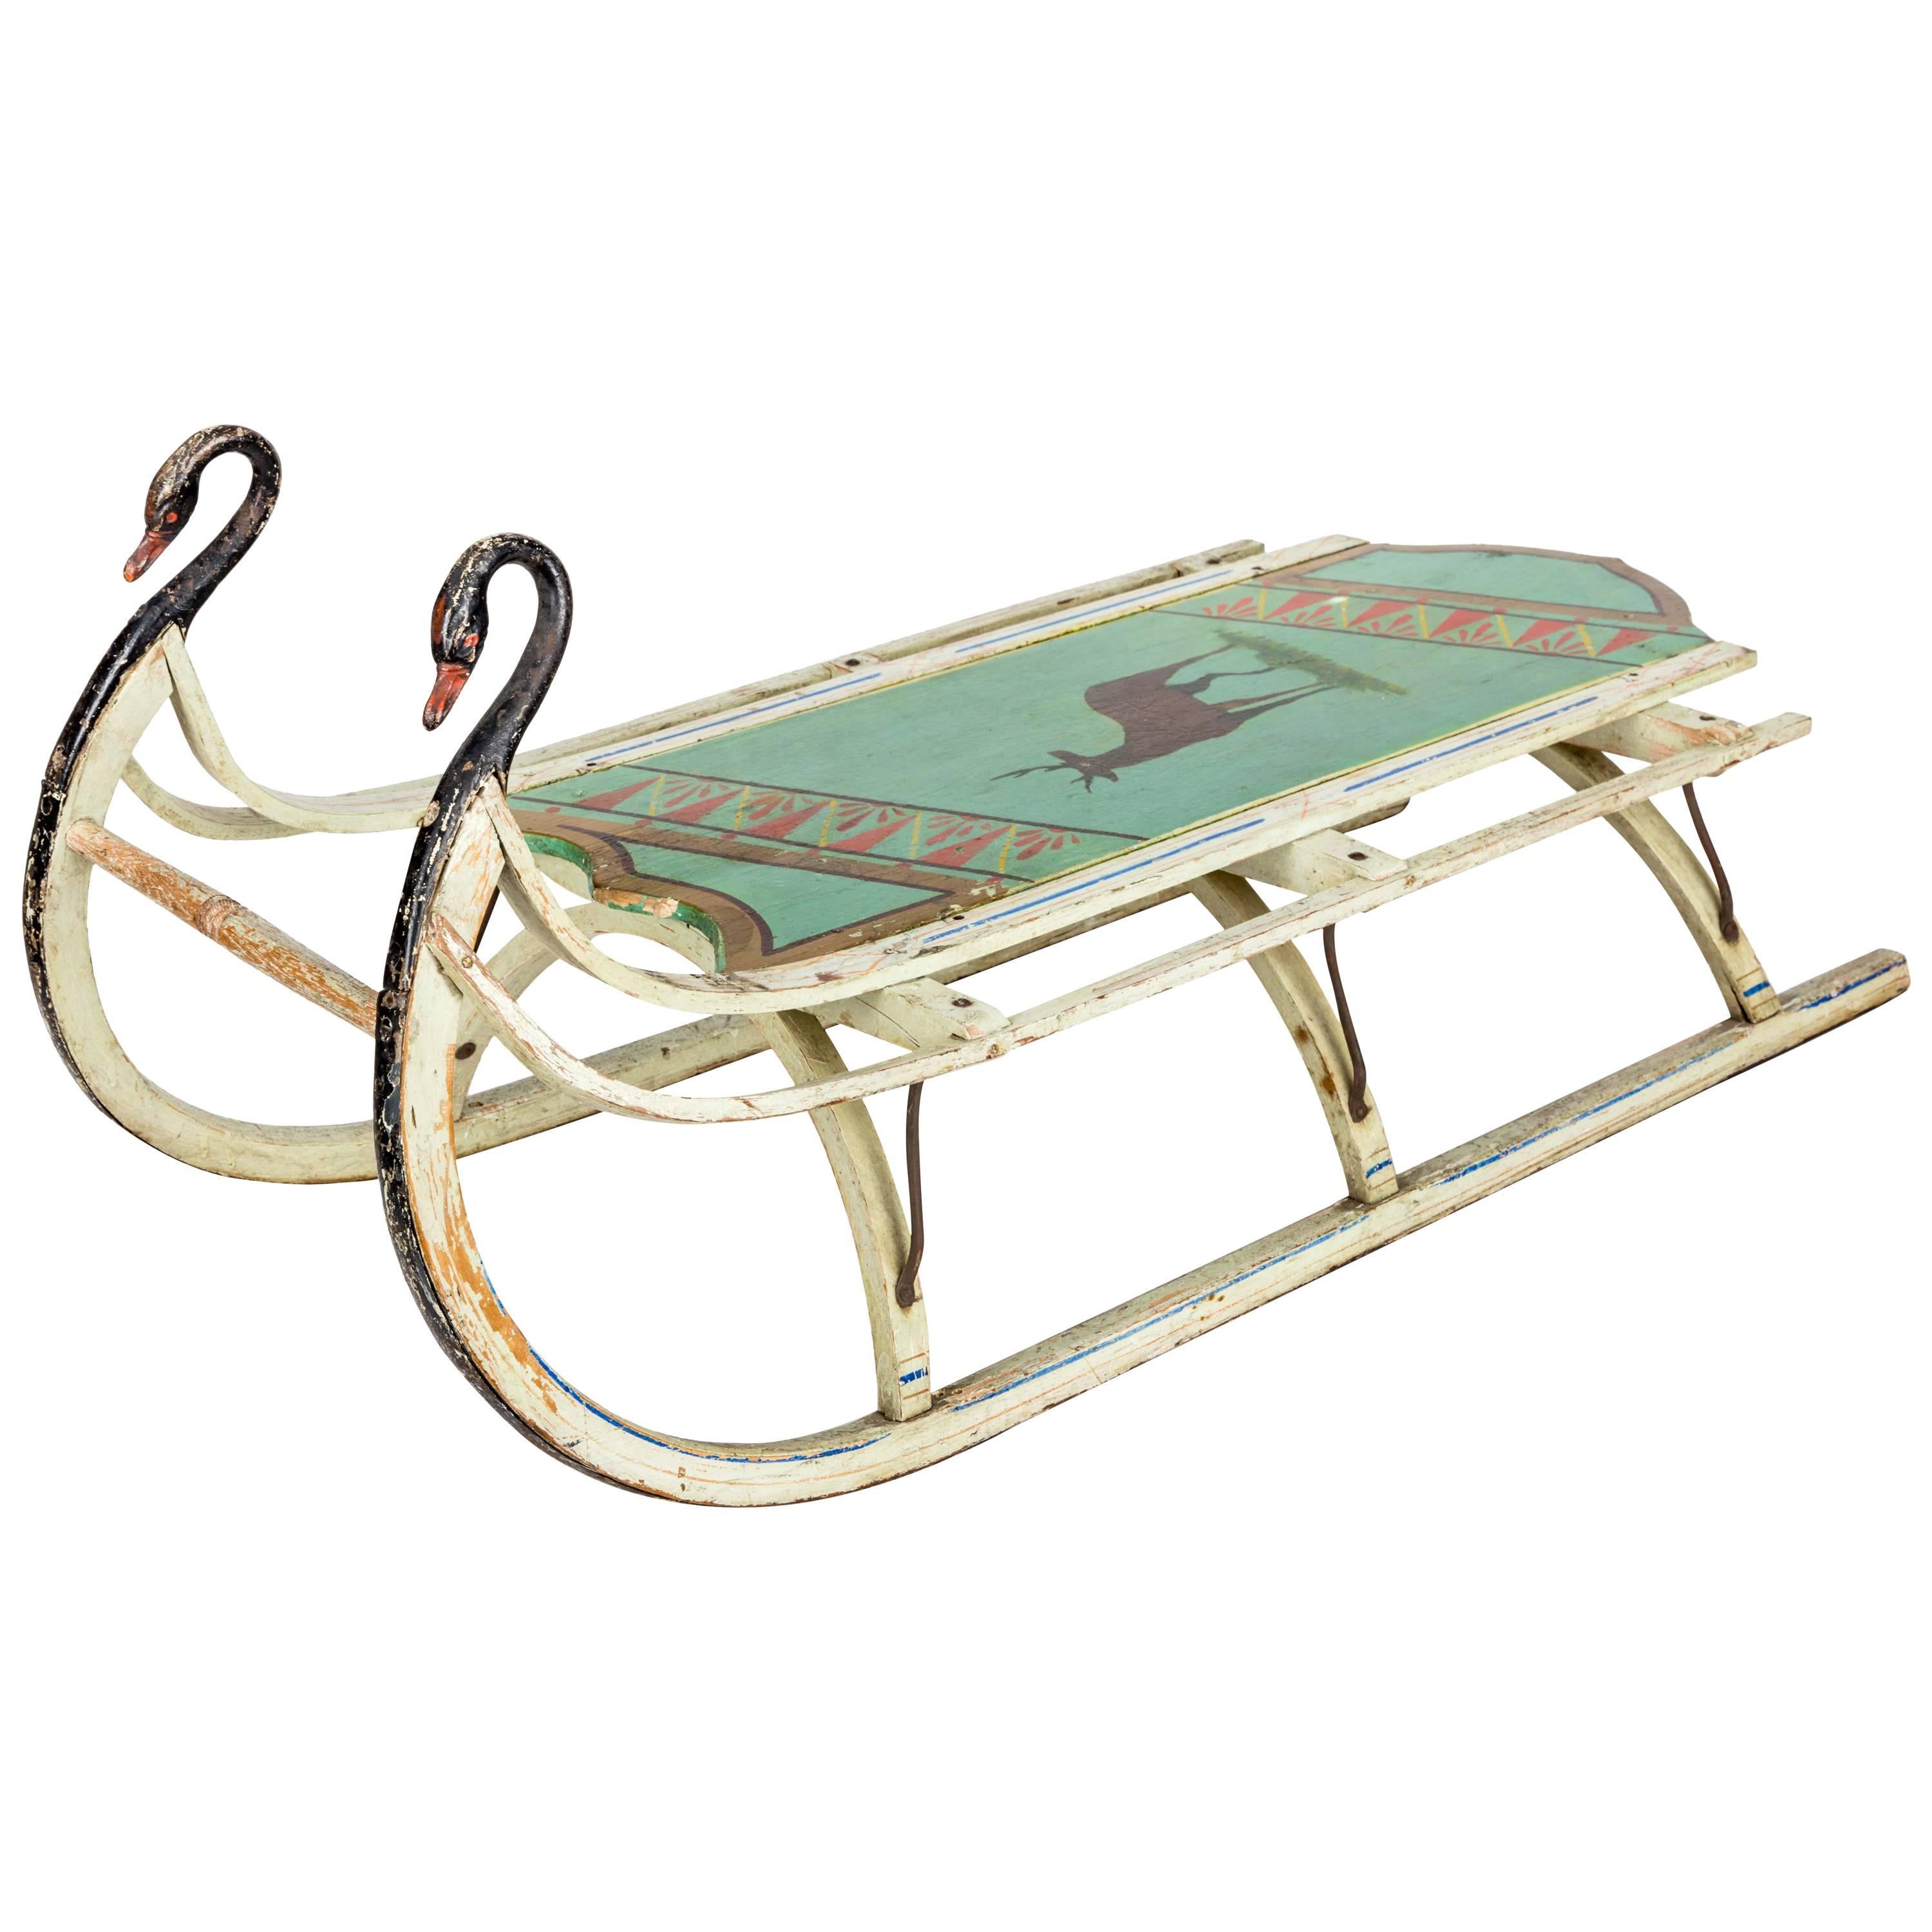 19th-Century Wooden Sled with Original Paint and Iron Swan Runners